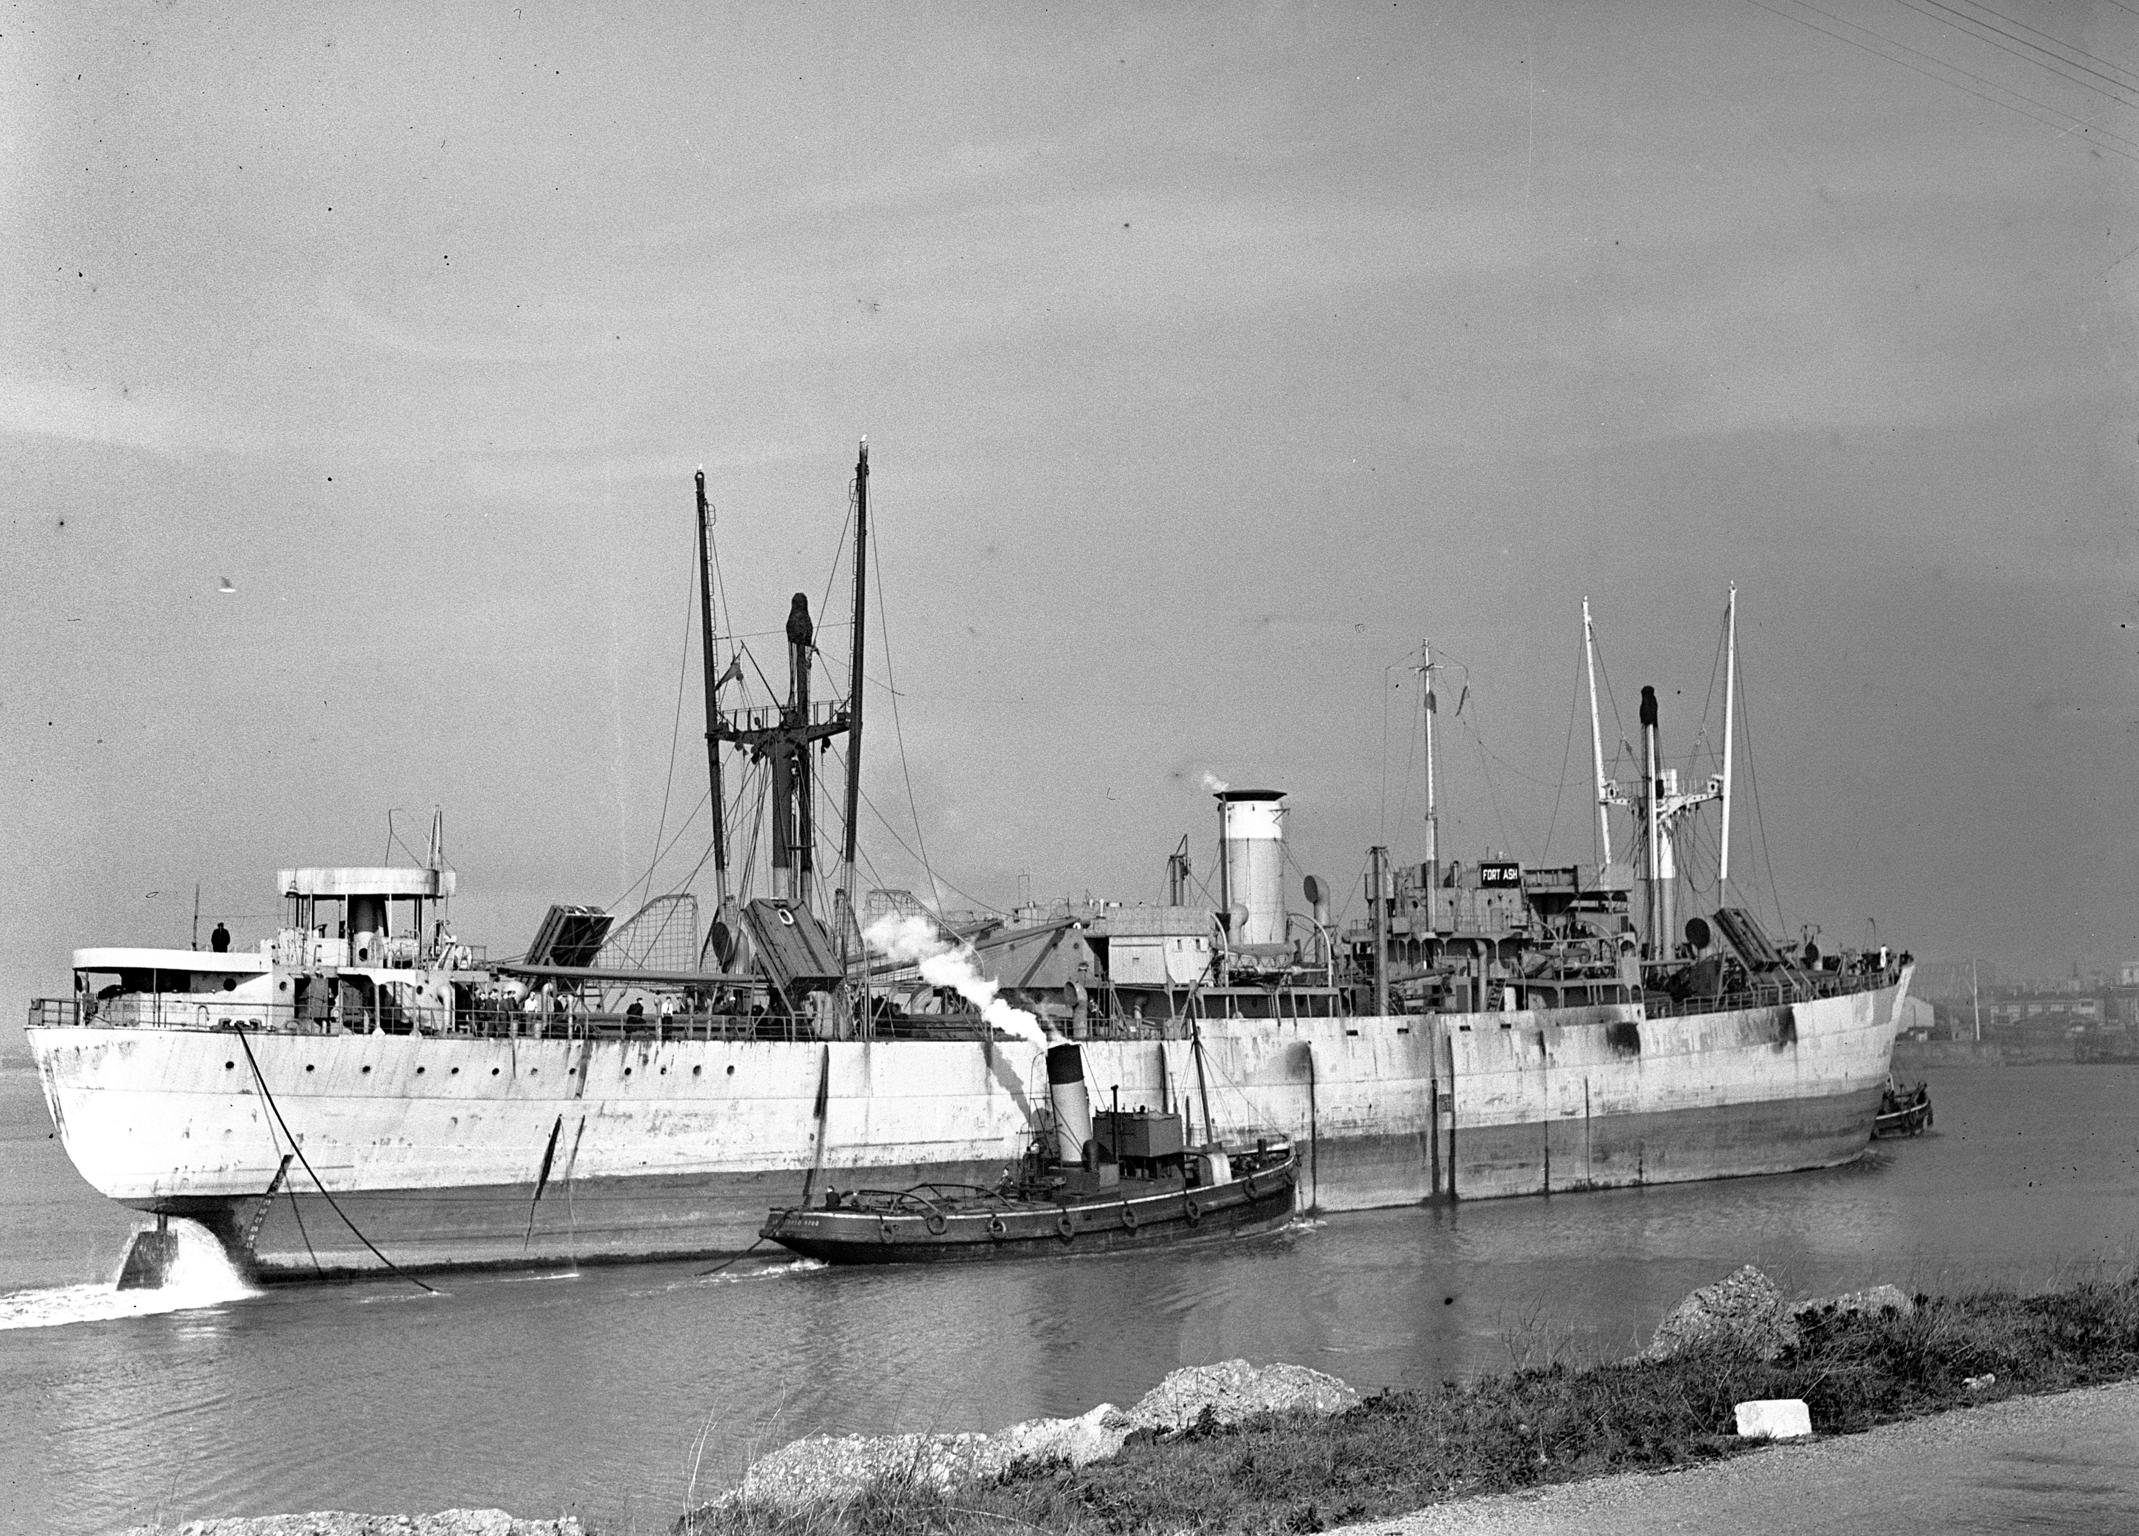 S.S. FORT ASH, glass negative